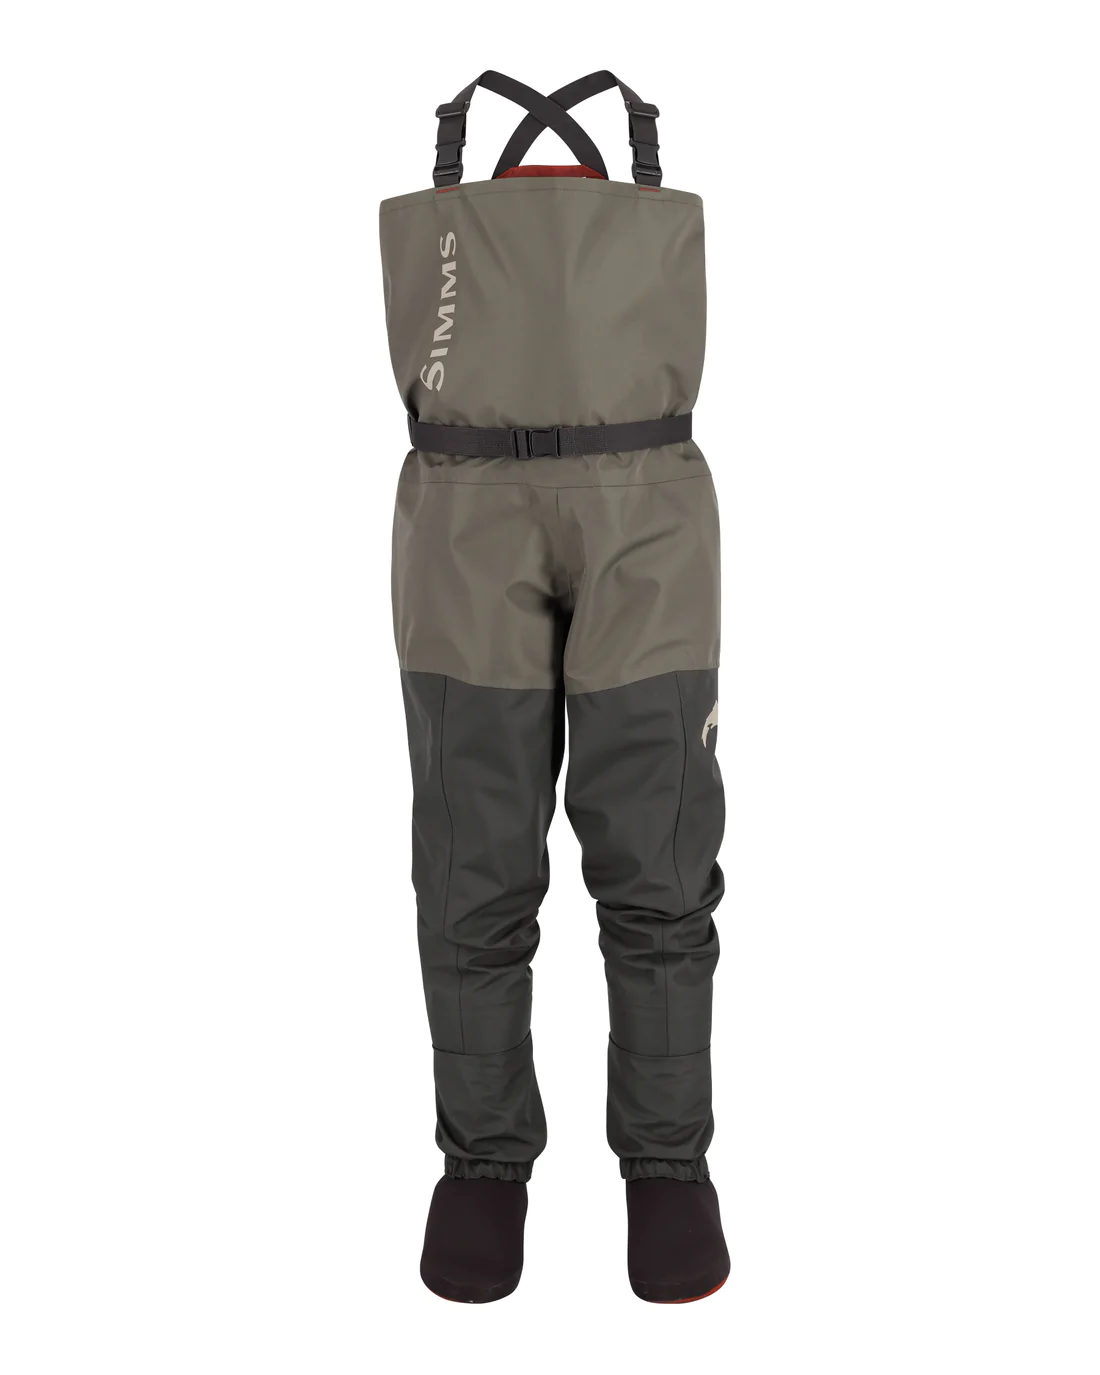 https://www.yellowstoneangler.com/wp-content/uploads/2023/01/kids-tributary-stockingfoot-mannequin-s23-front_1100x.webp